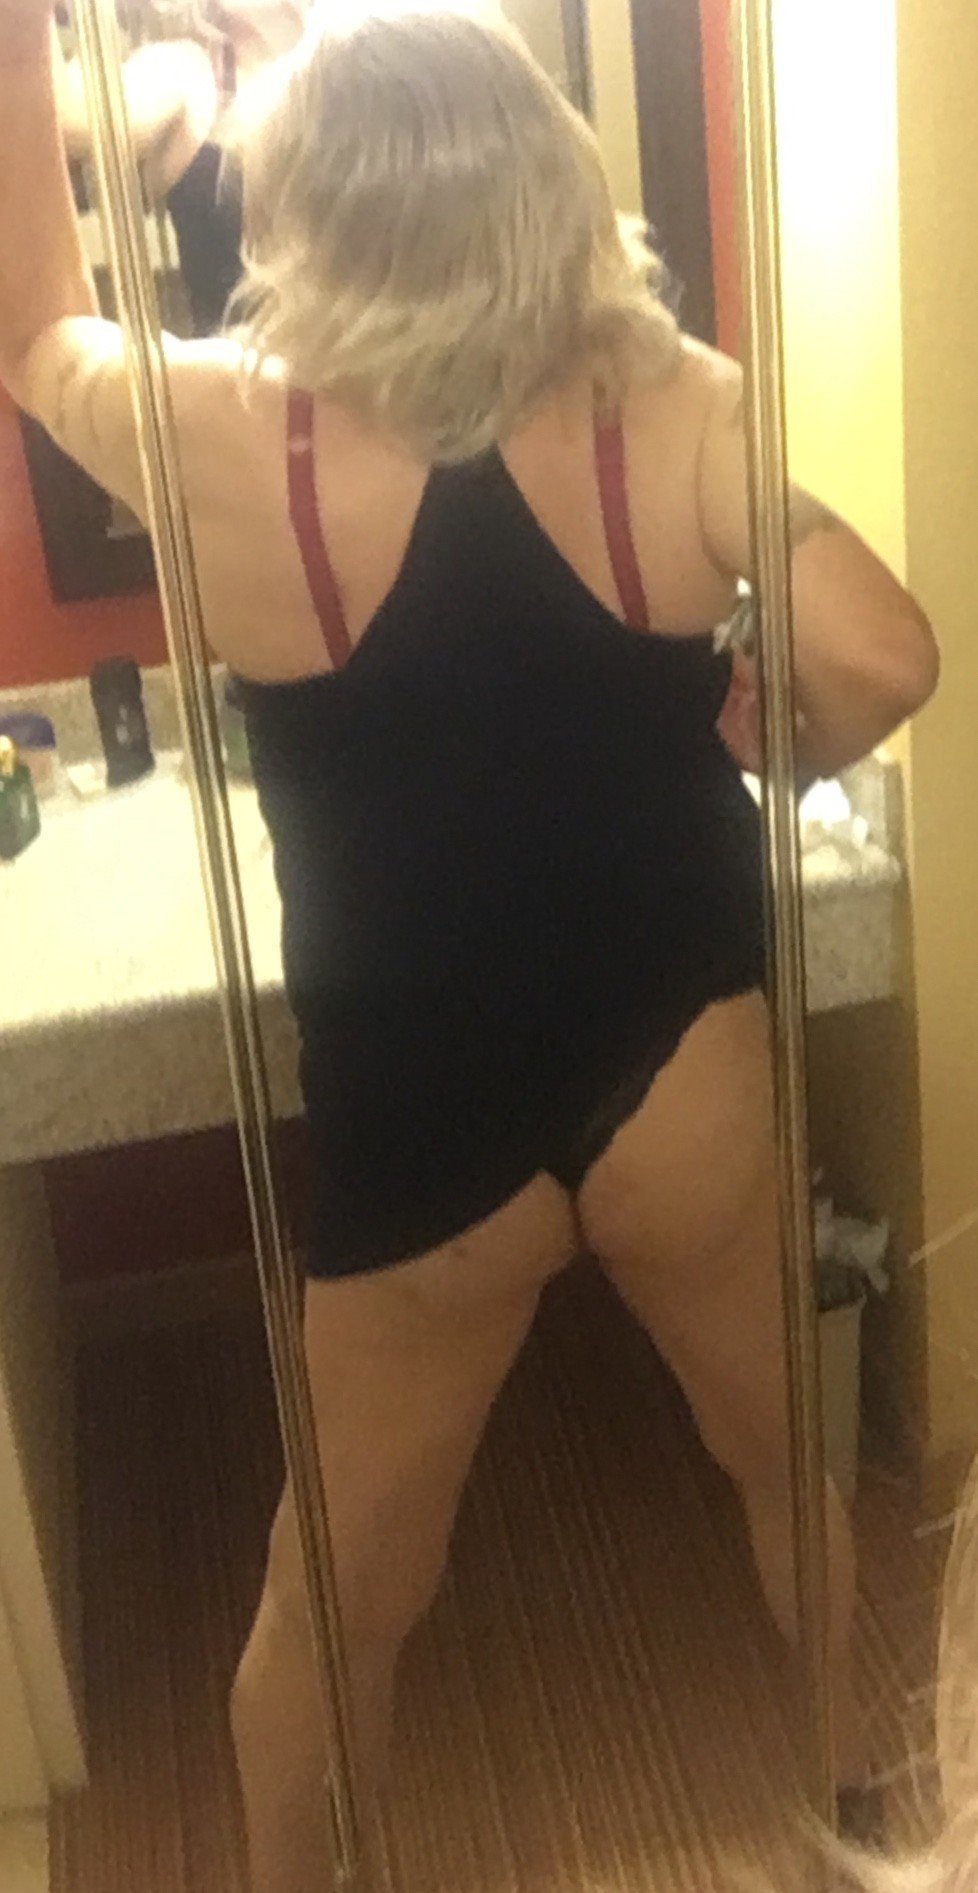 Photo by Sassycharlene666 with the username @Sassycharlene666t, who is a verified user,  January 14, 2021 at 6:12 AM. The post is about the topic Big Black Dicks and the text says 'any big black cocks hit this'